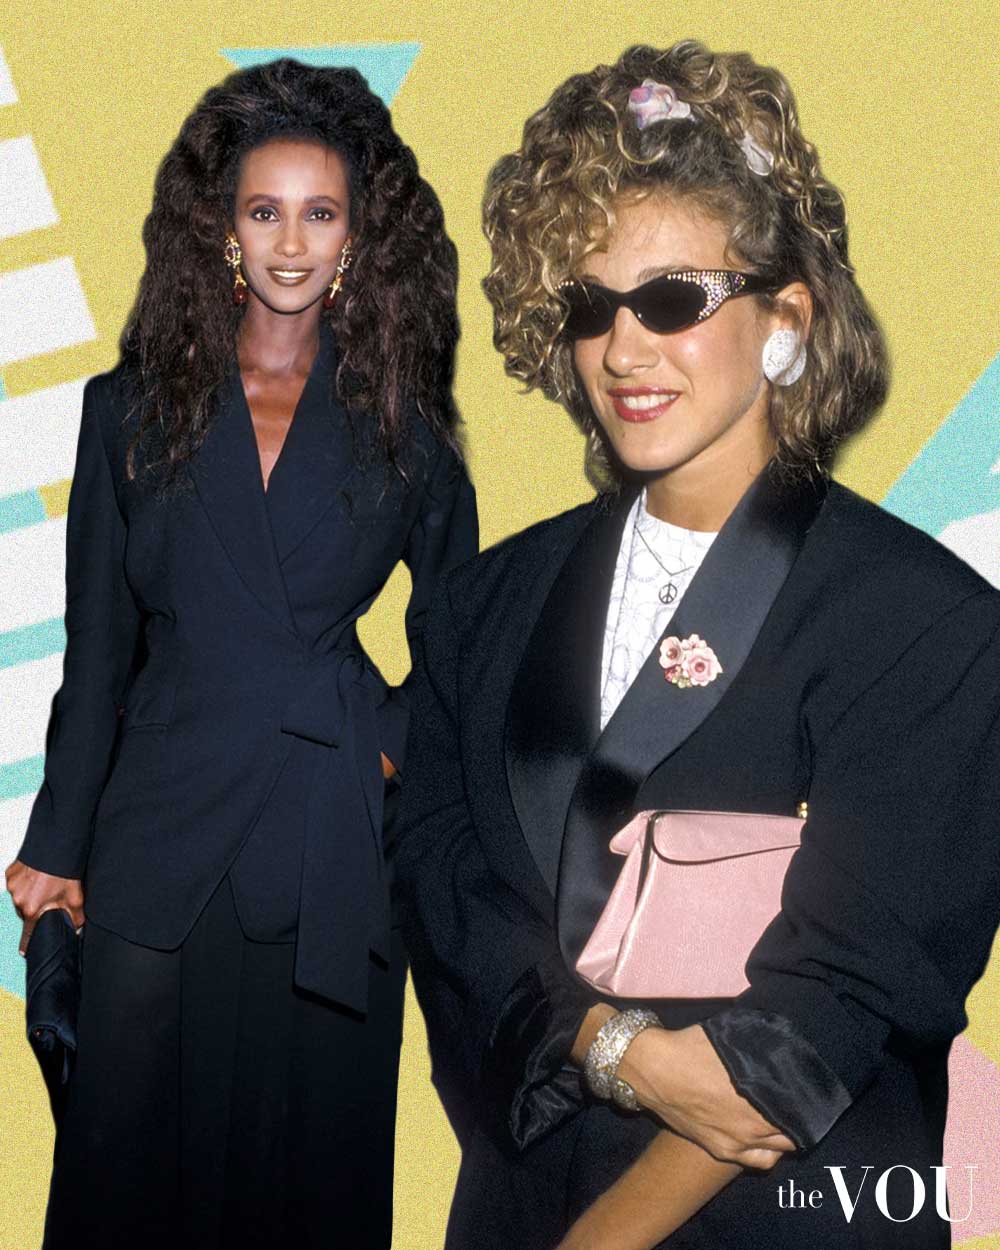 Iman and Sarah Jessica Parker wearing statement jewelry of the 80s that is coming back now